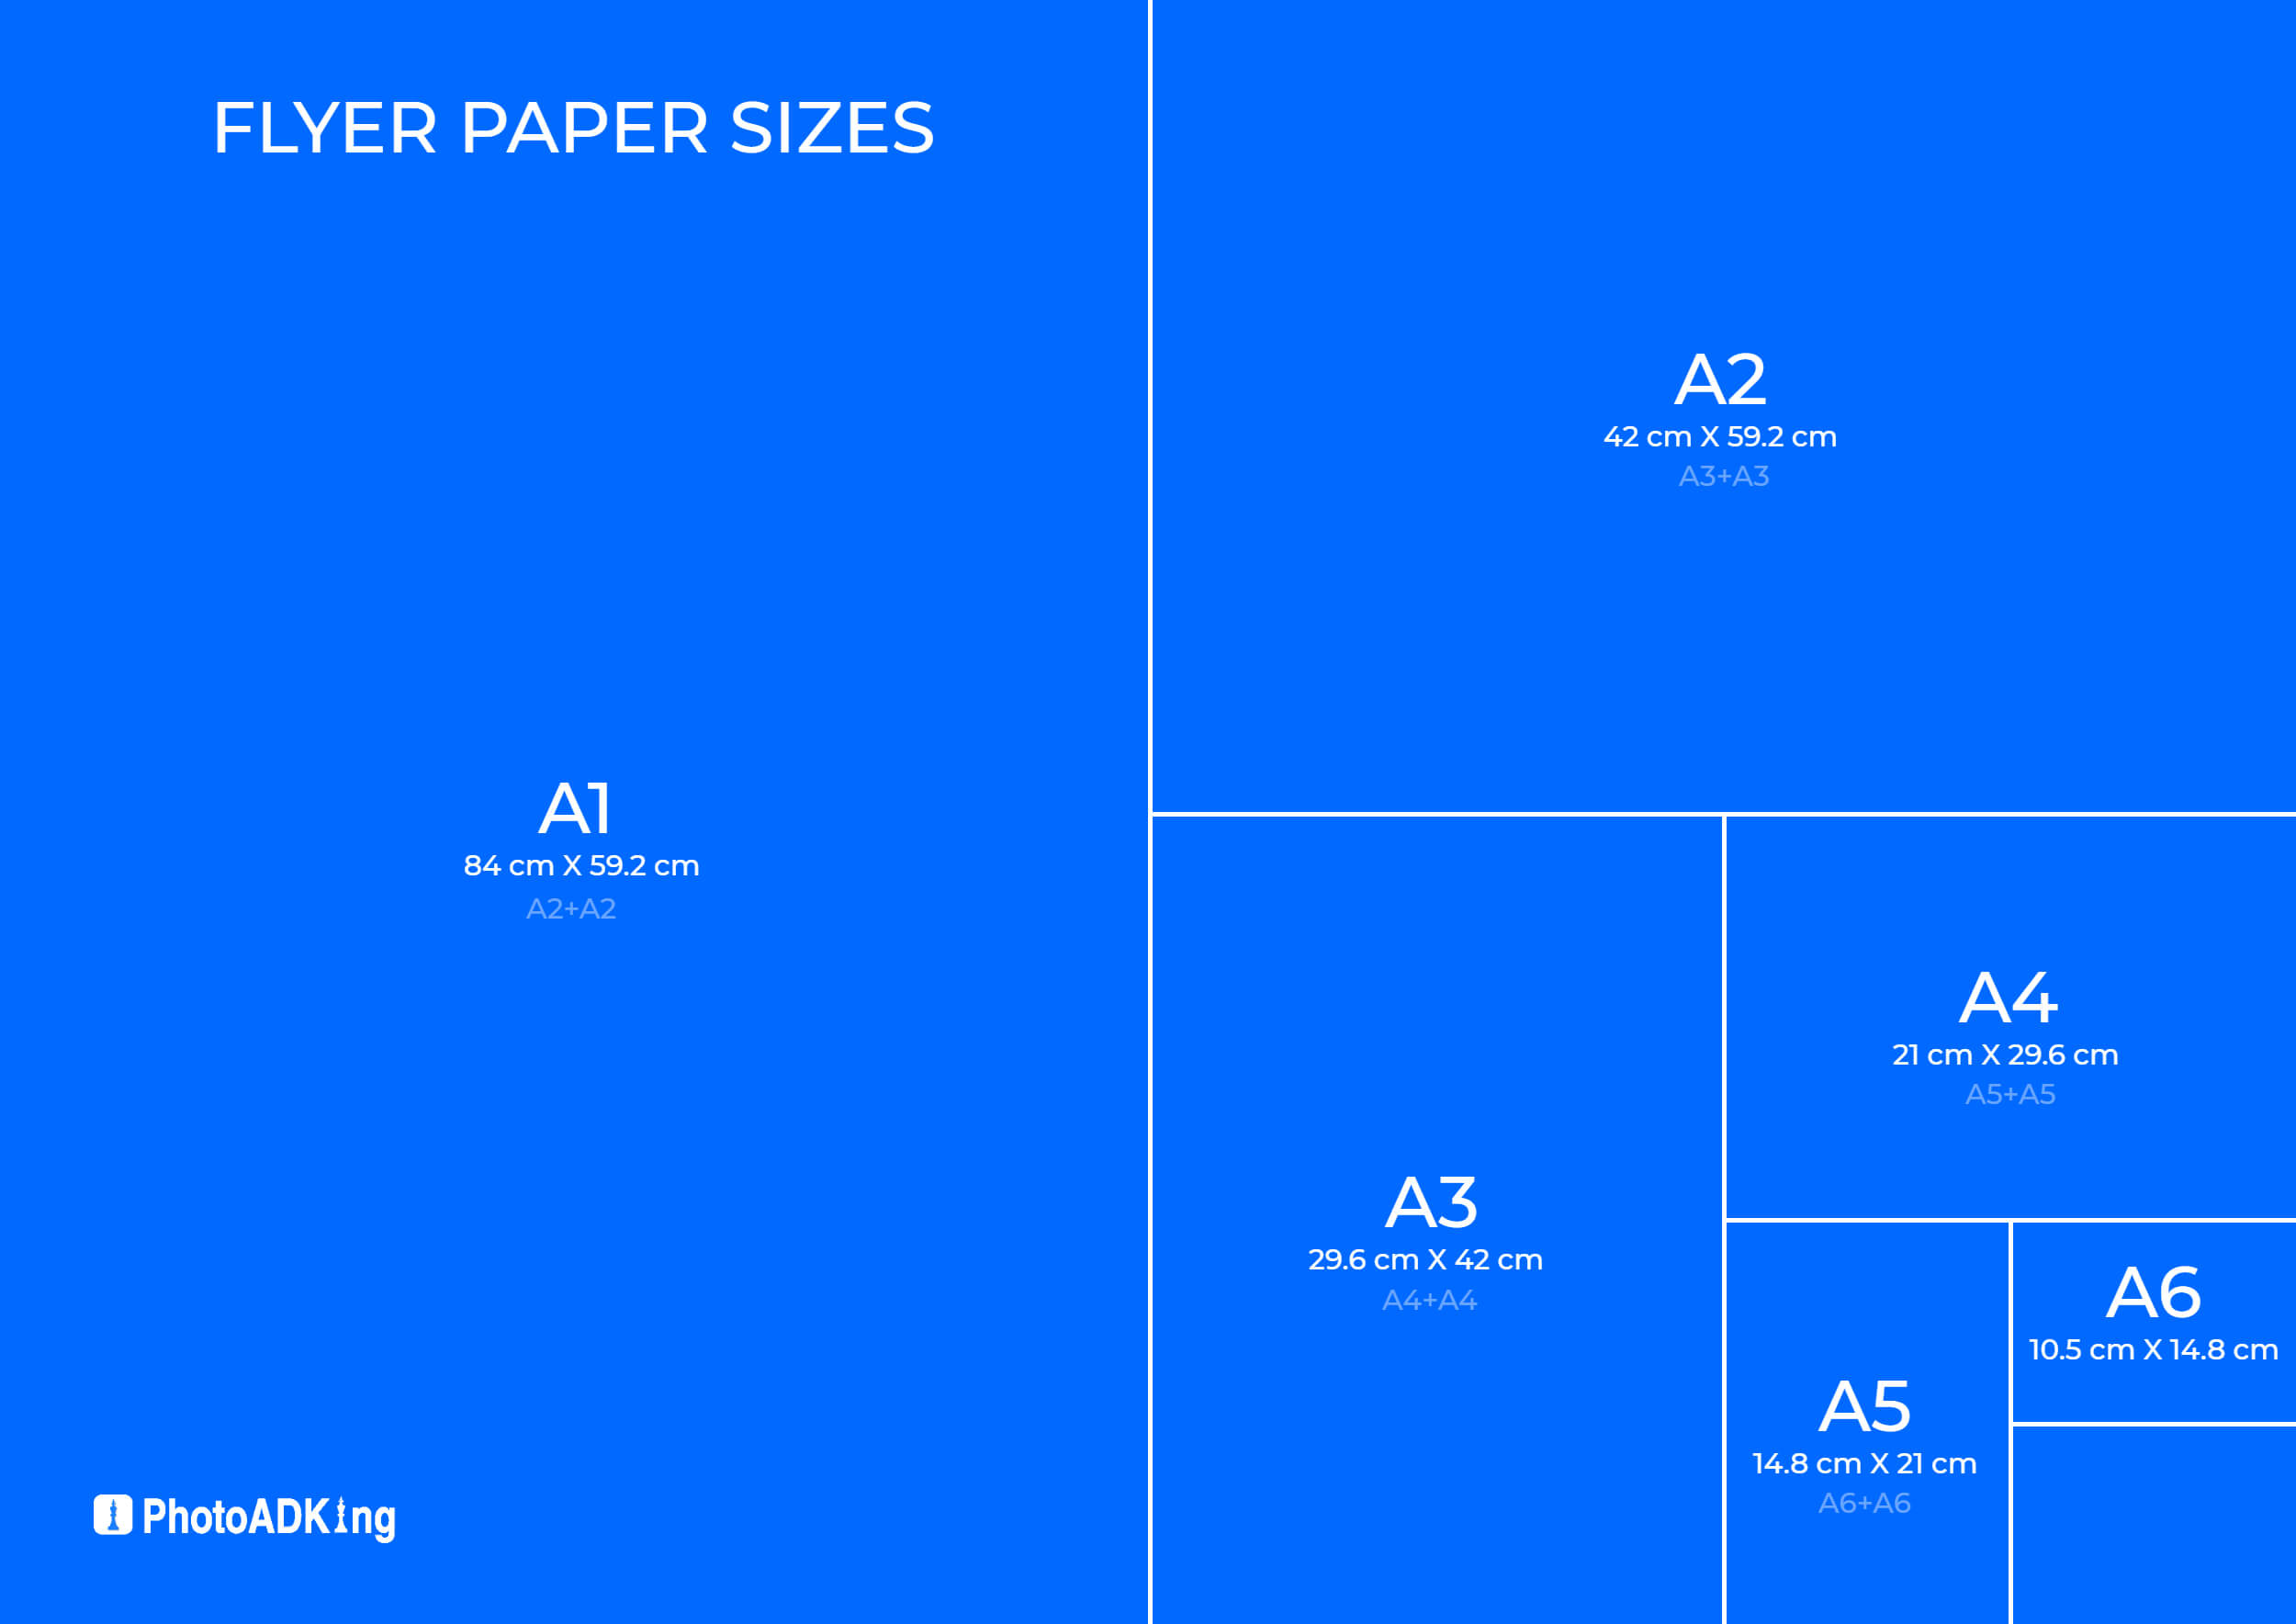 Flyer Paper Sizes